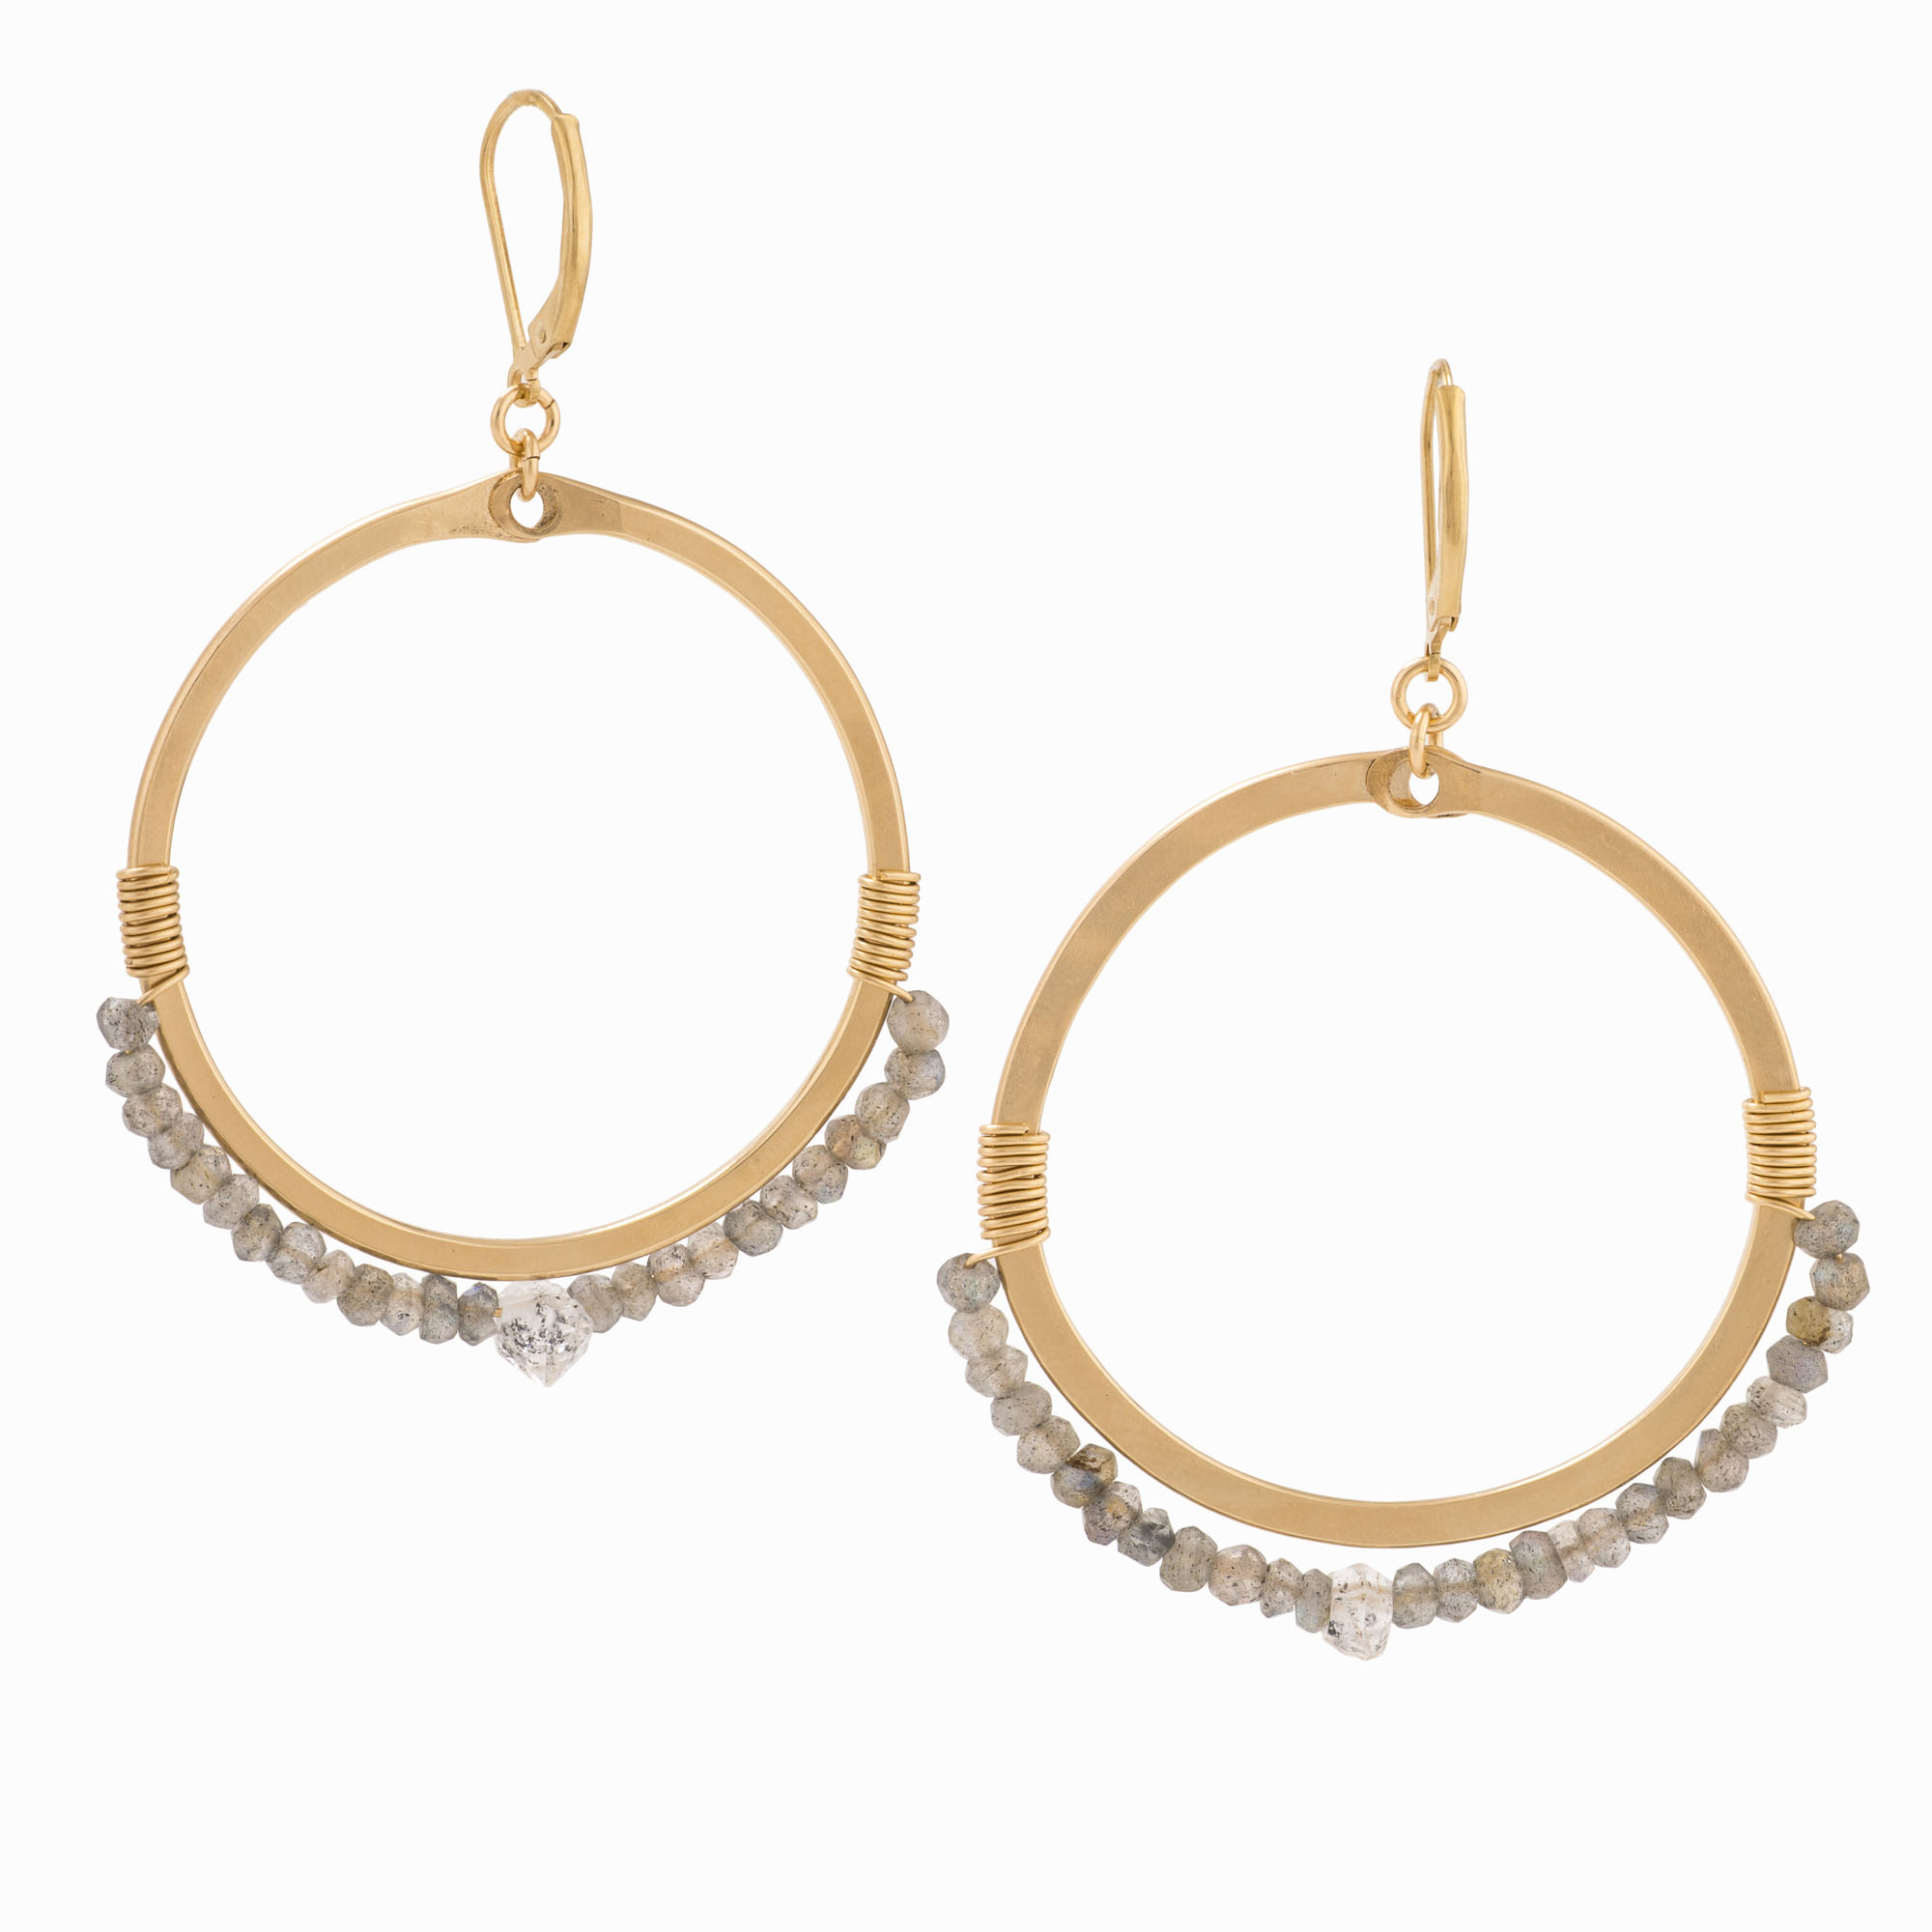 14k gold-filled hoop earrings with wire-wrapped labradorite beads.